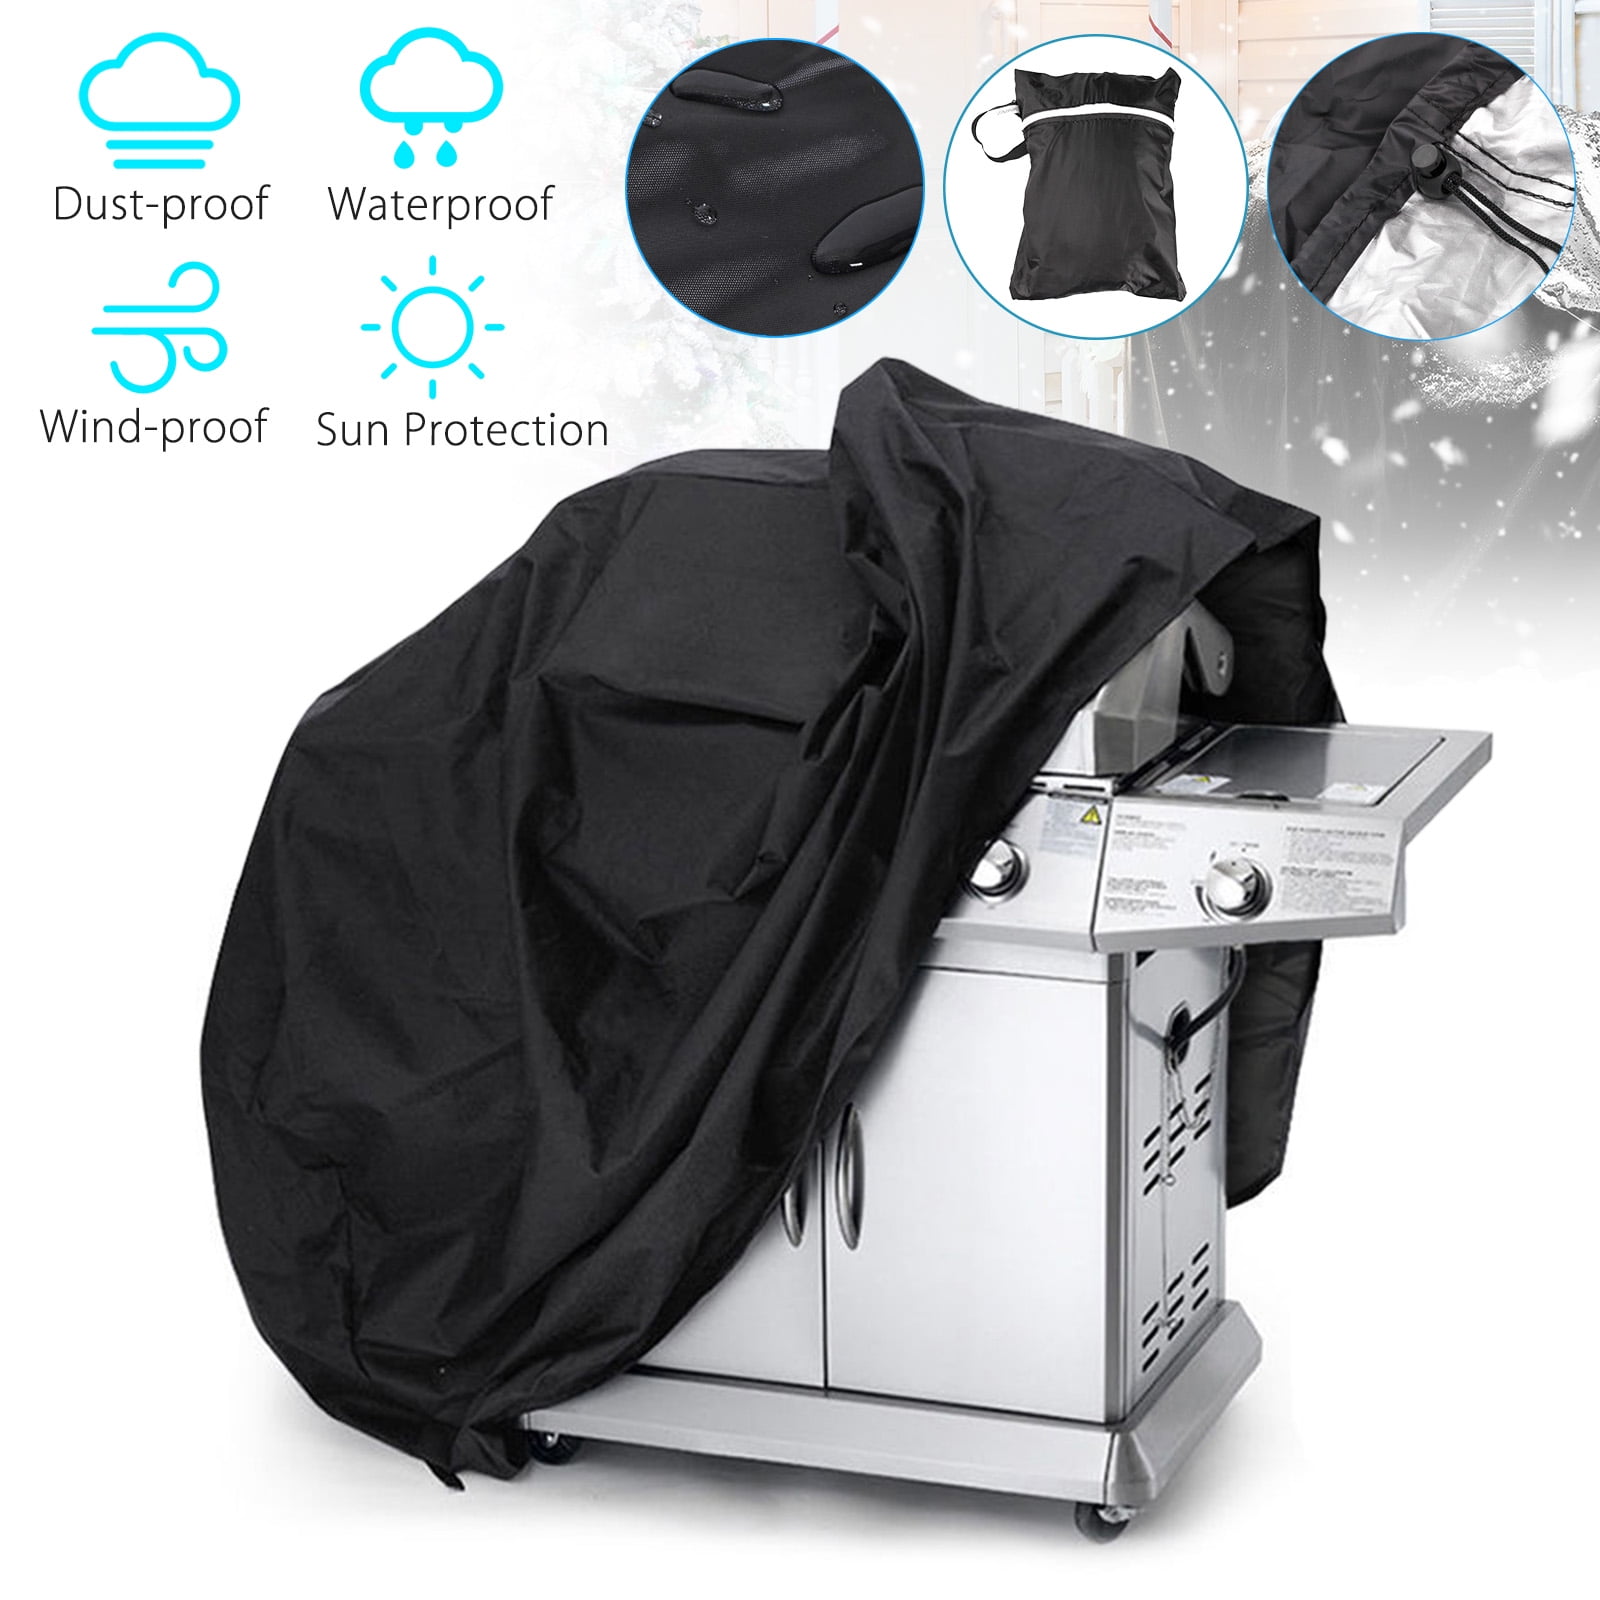 Details about   S-2xl Bbq Cover Waterproof Patio Barbecue Grill Gas Heavy Duty Protector U5Q0 